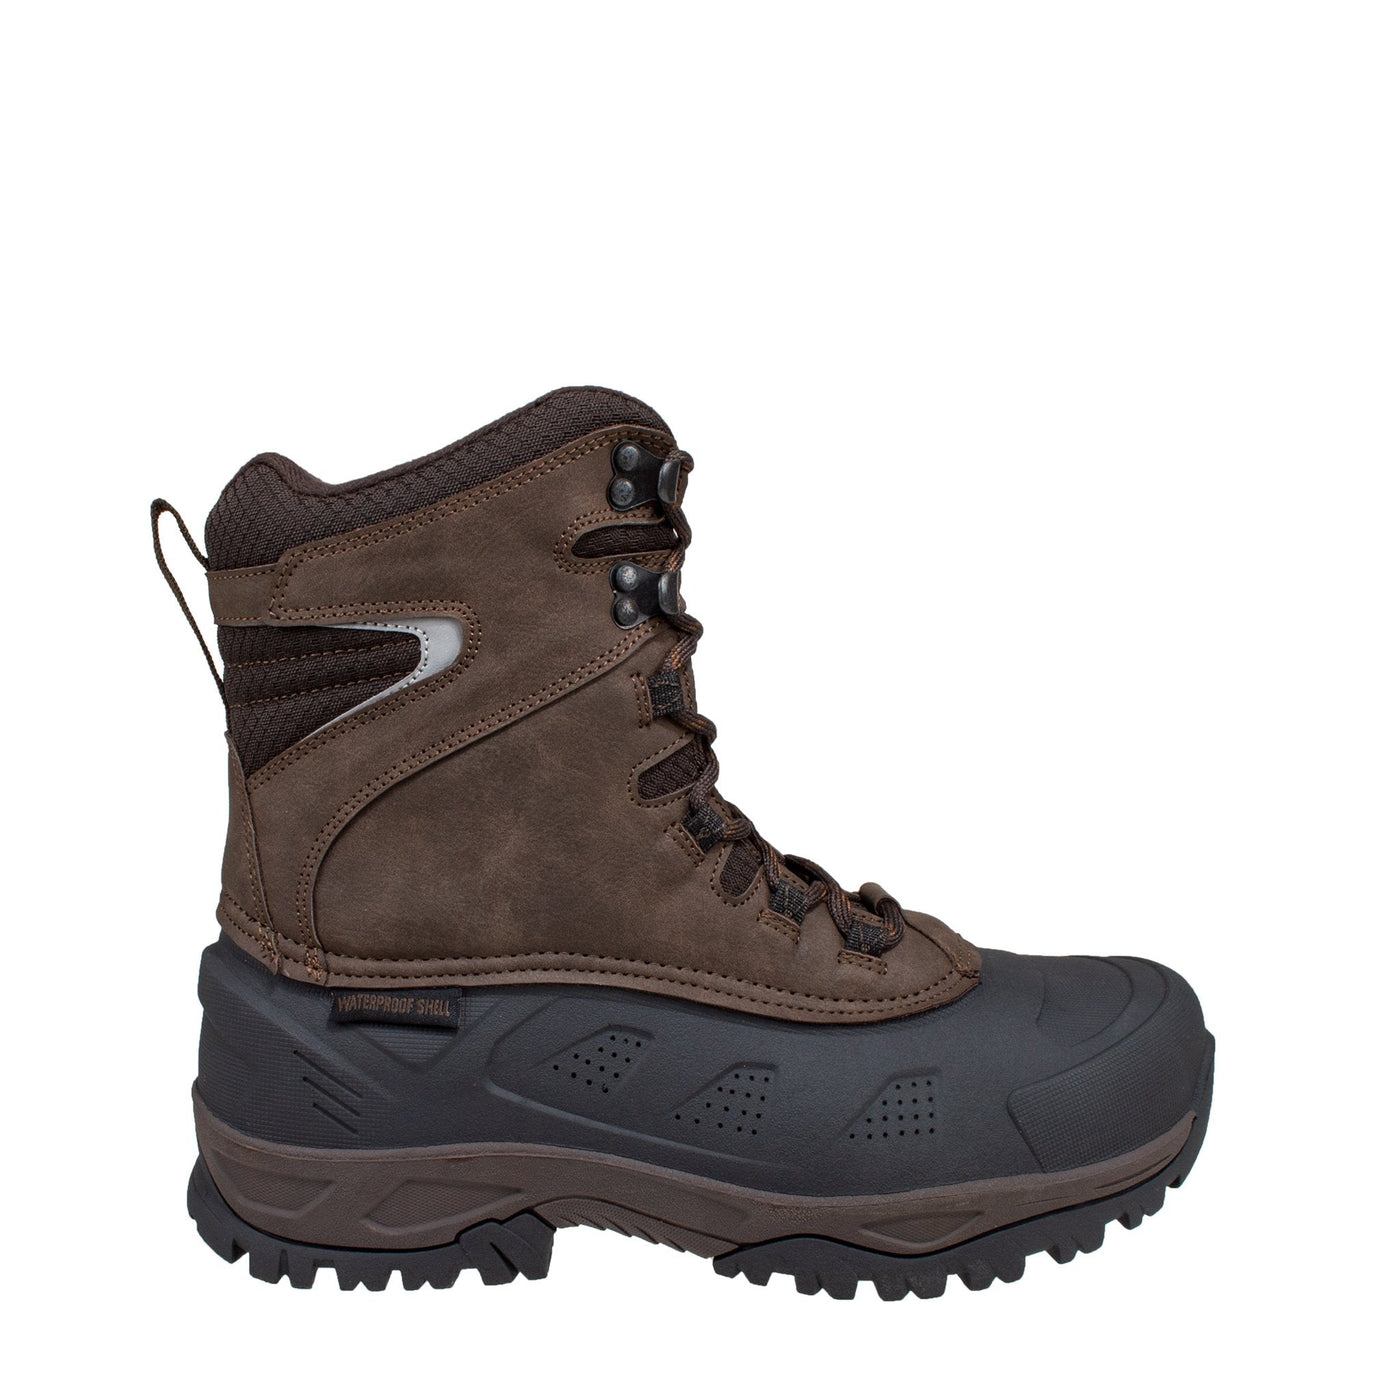 men's mid height, brown, synthetic leather, insulated shell boot with speed hooks